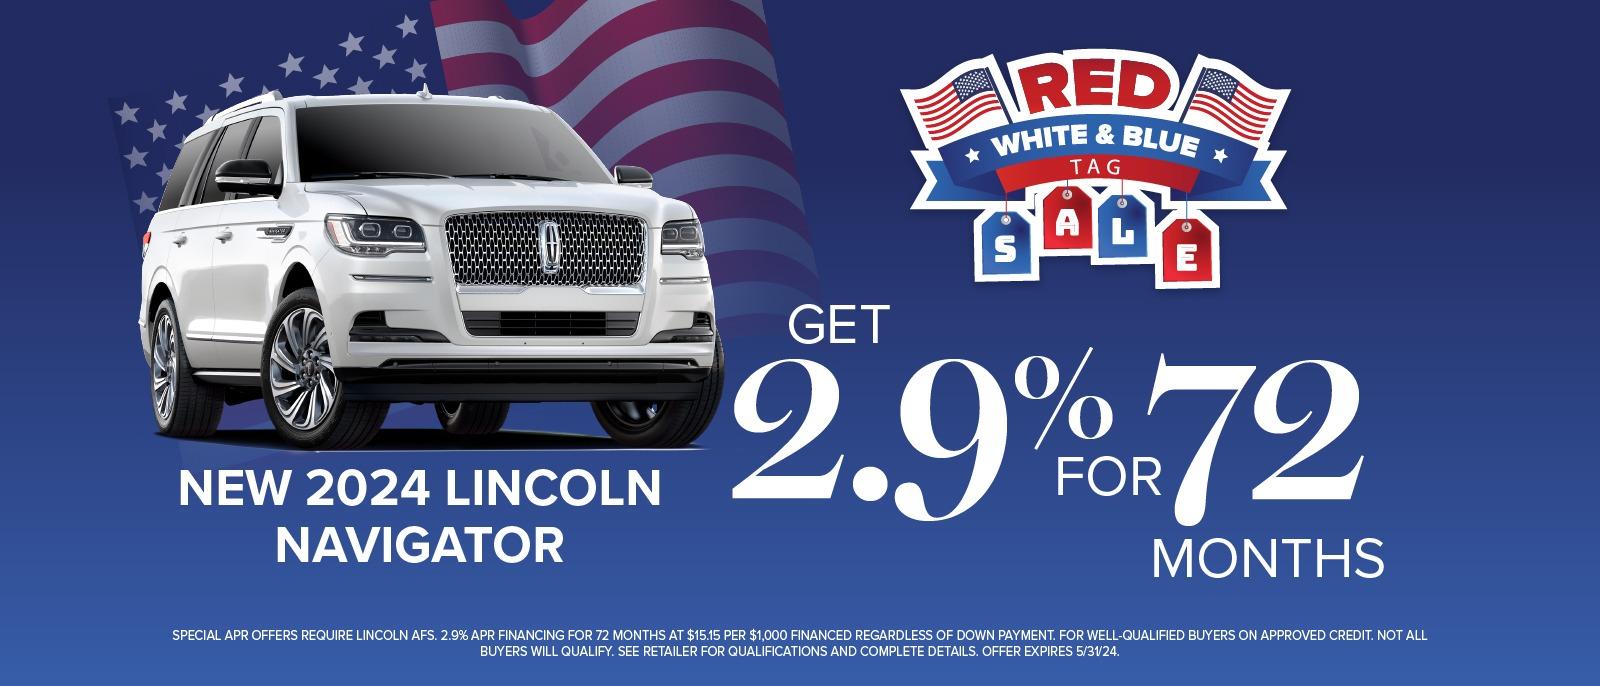 Red, White & Blue Tag Sale Lincoln Navigator Special!🔖